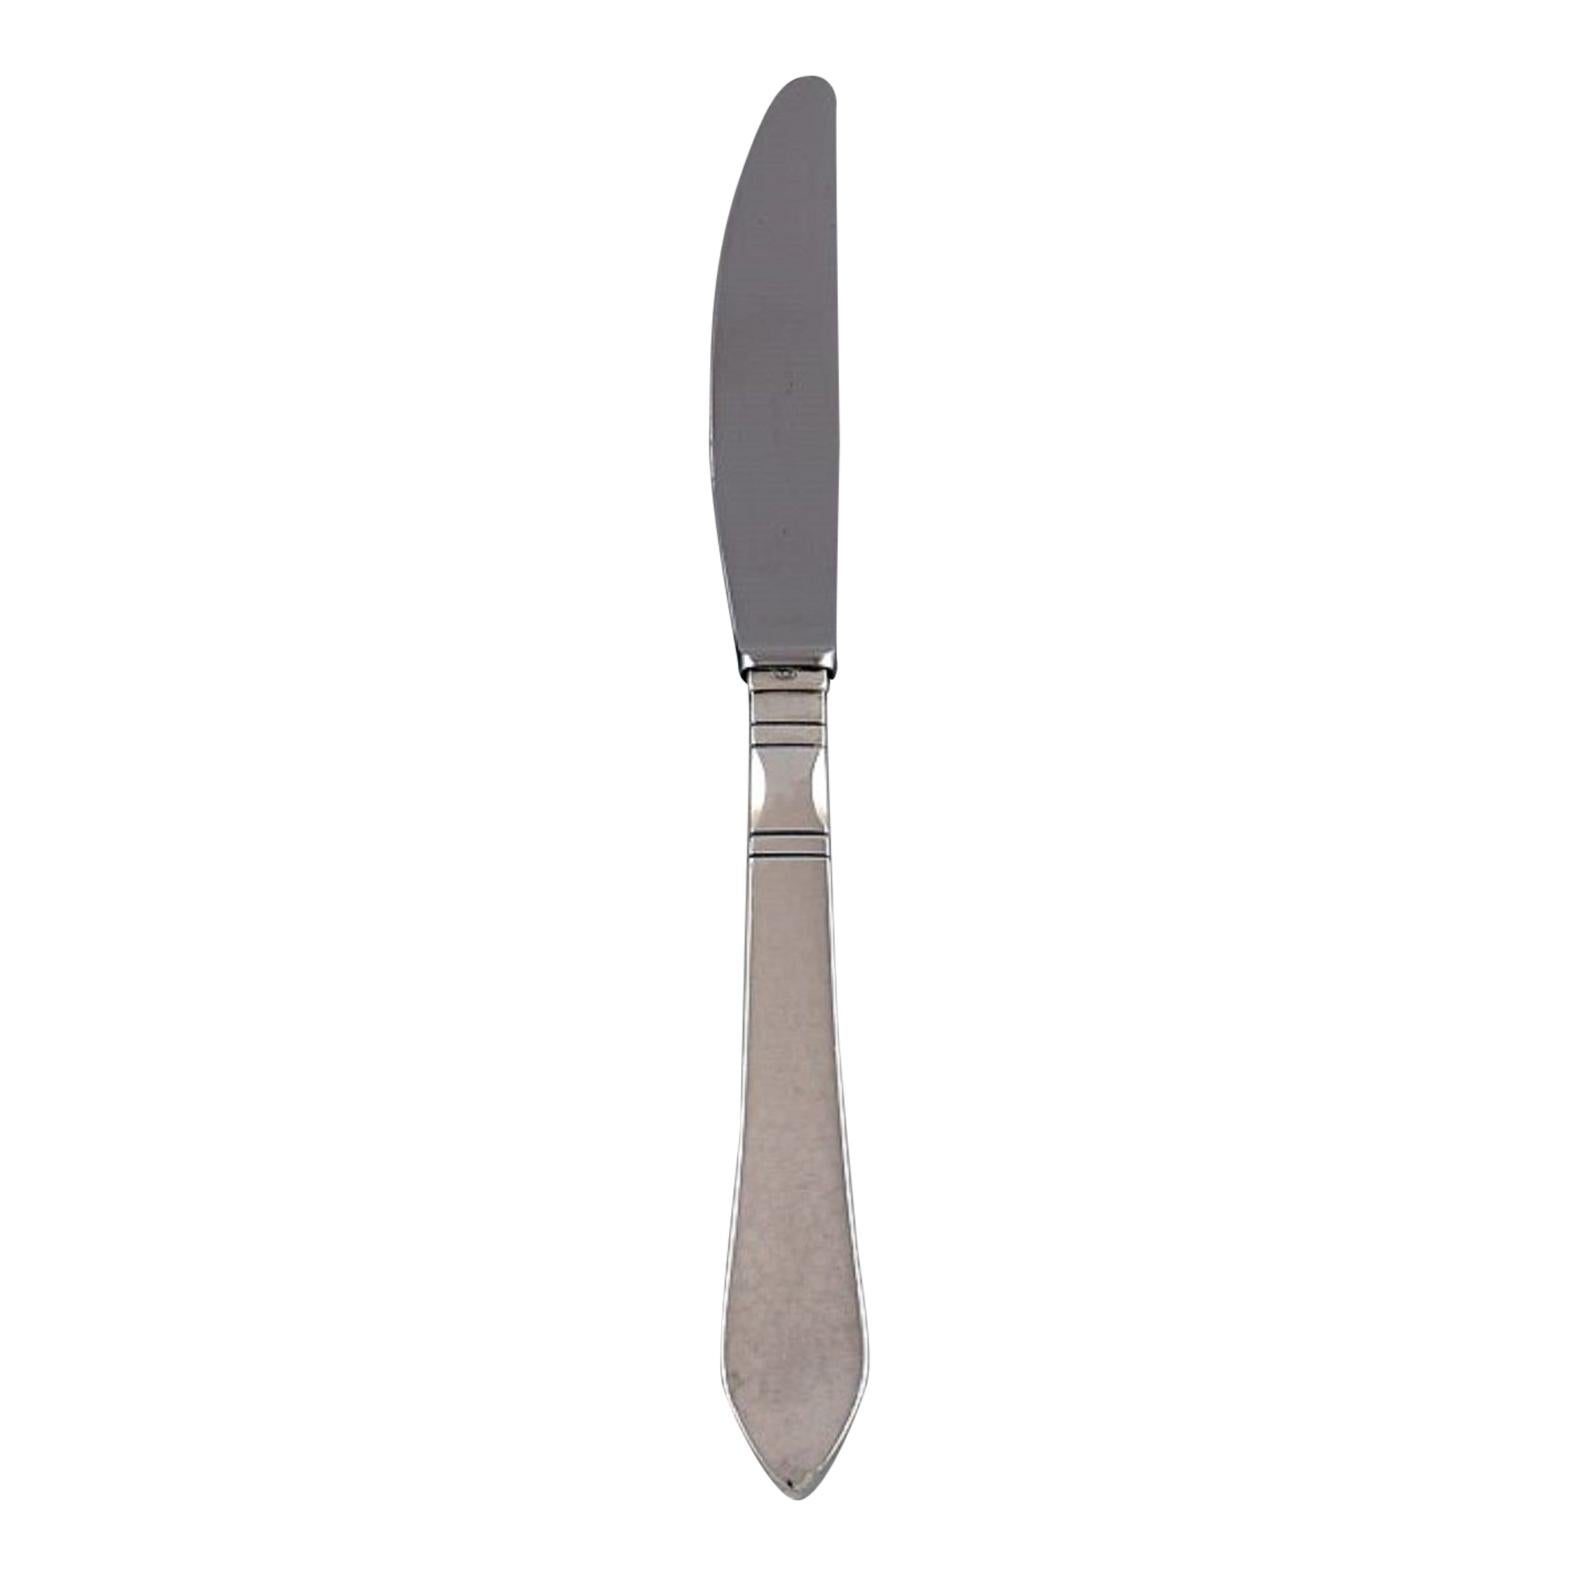 Georg Jensen Continental Dinner Knife in Sterling Silver and Stainless Steel